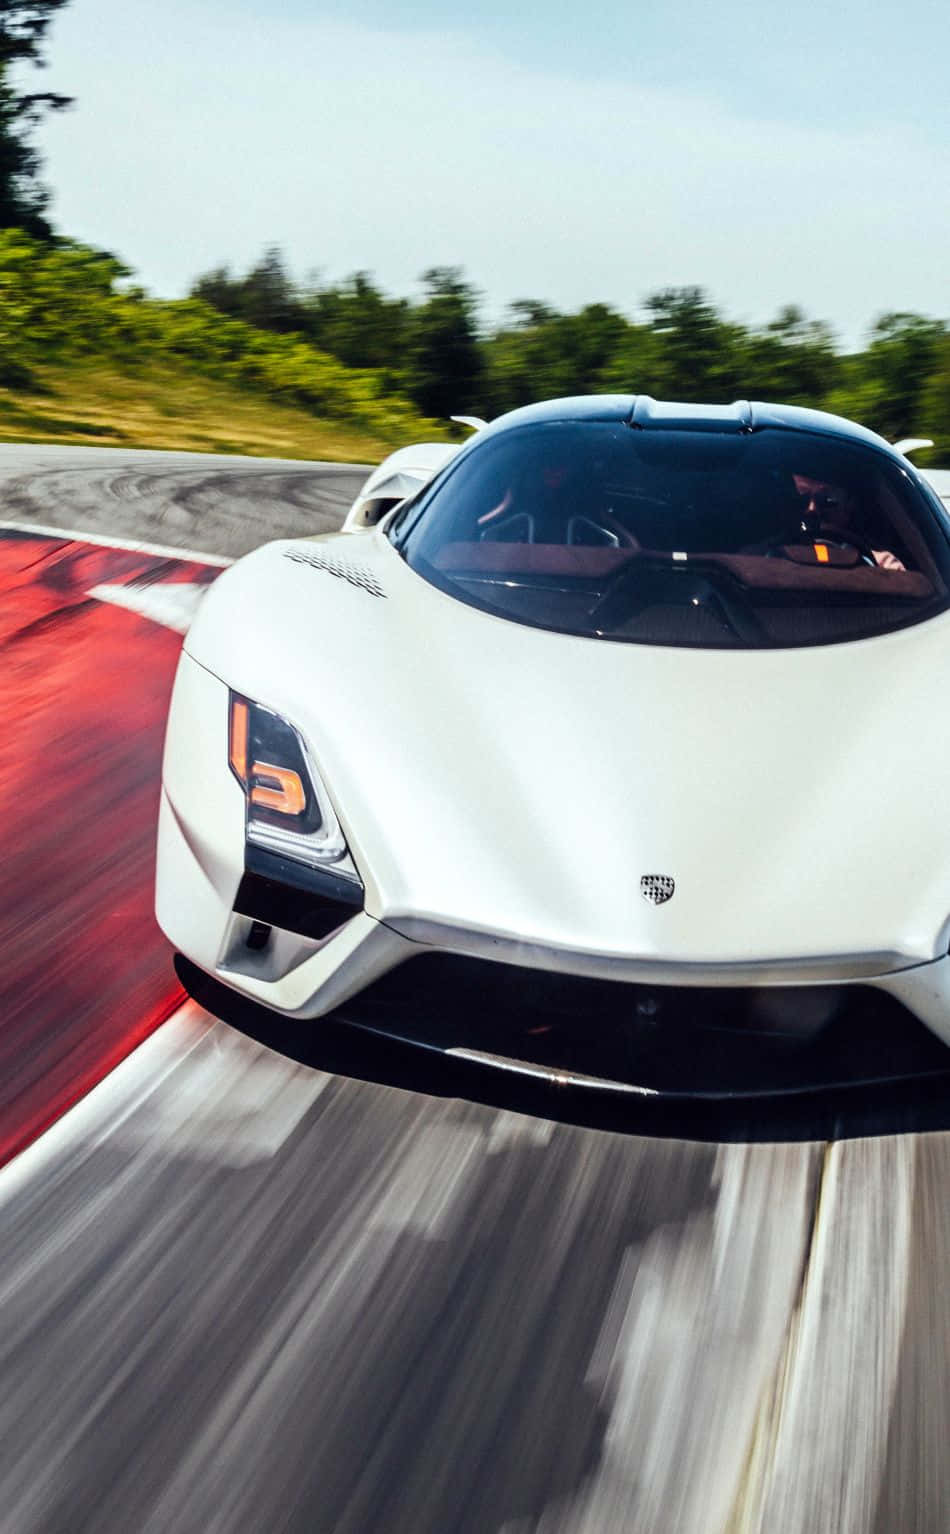 The White Supercar Is Driving Down The Track Wallpaper